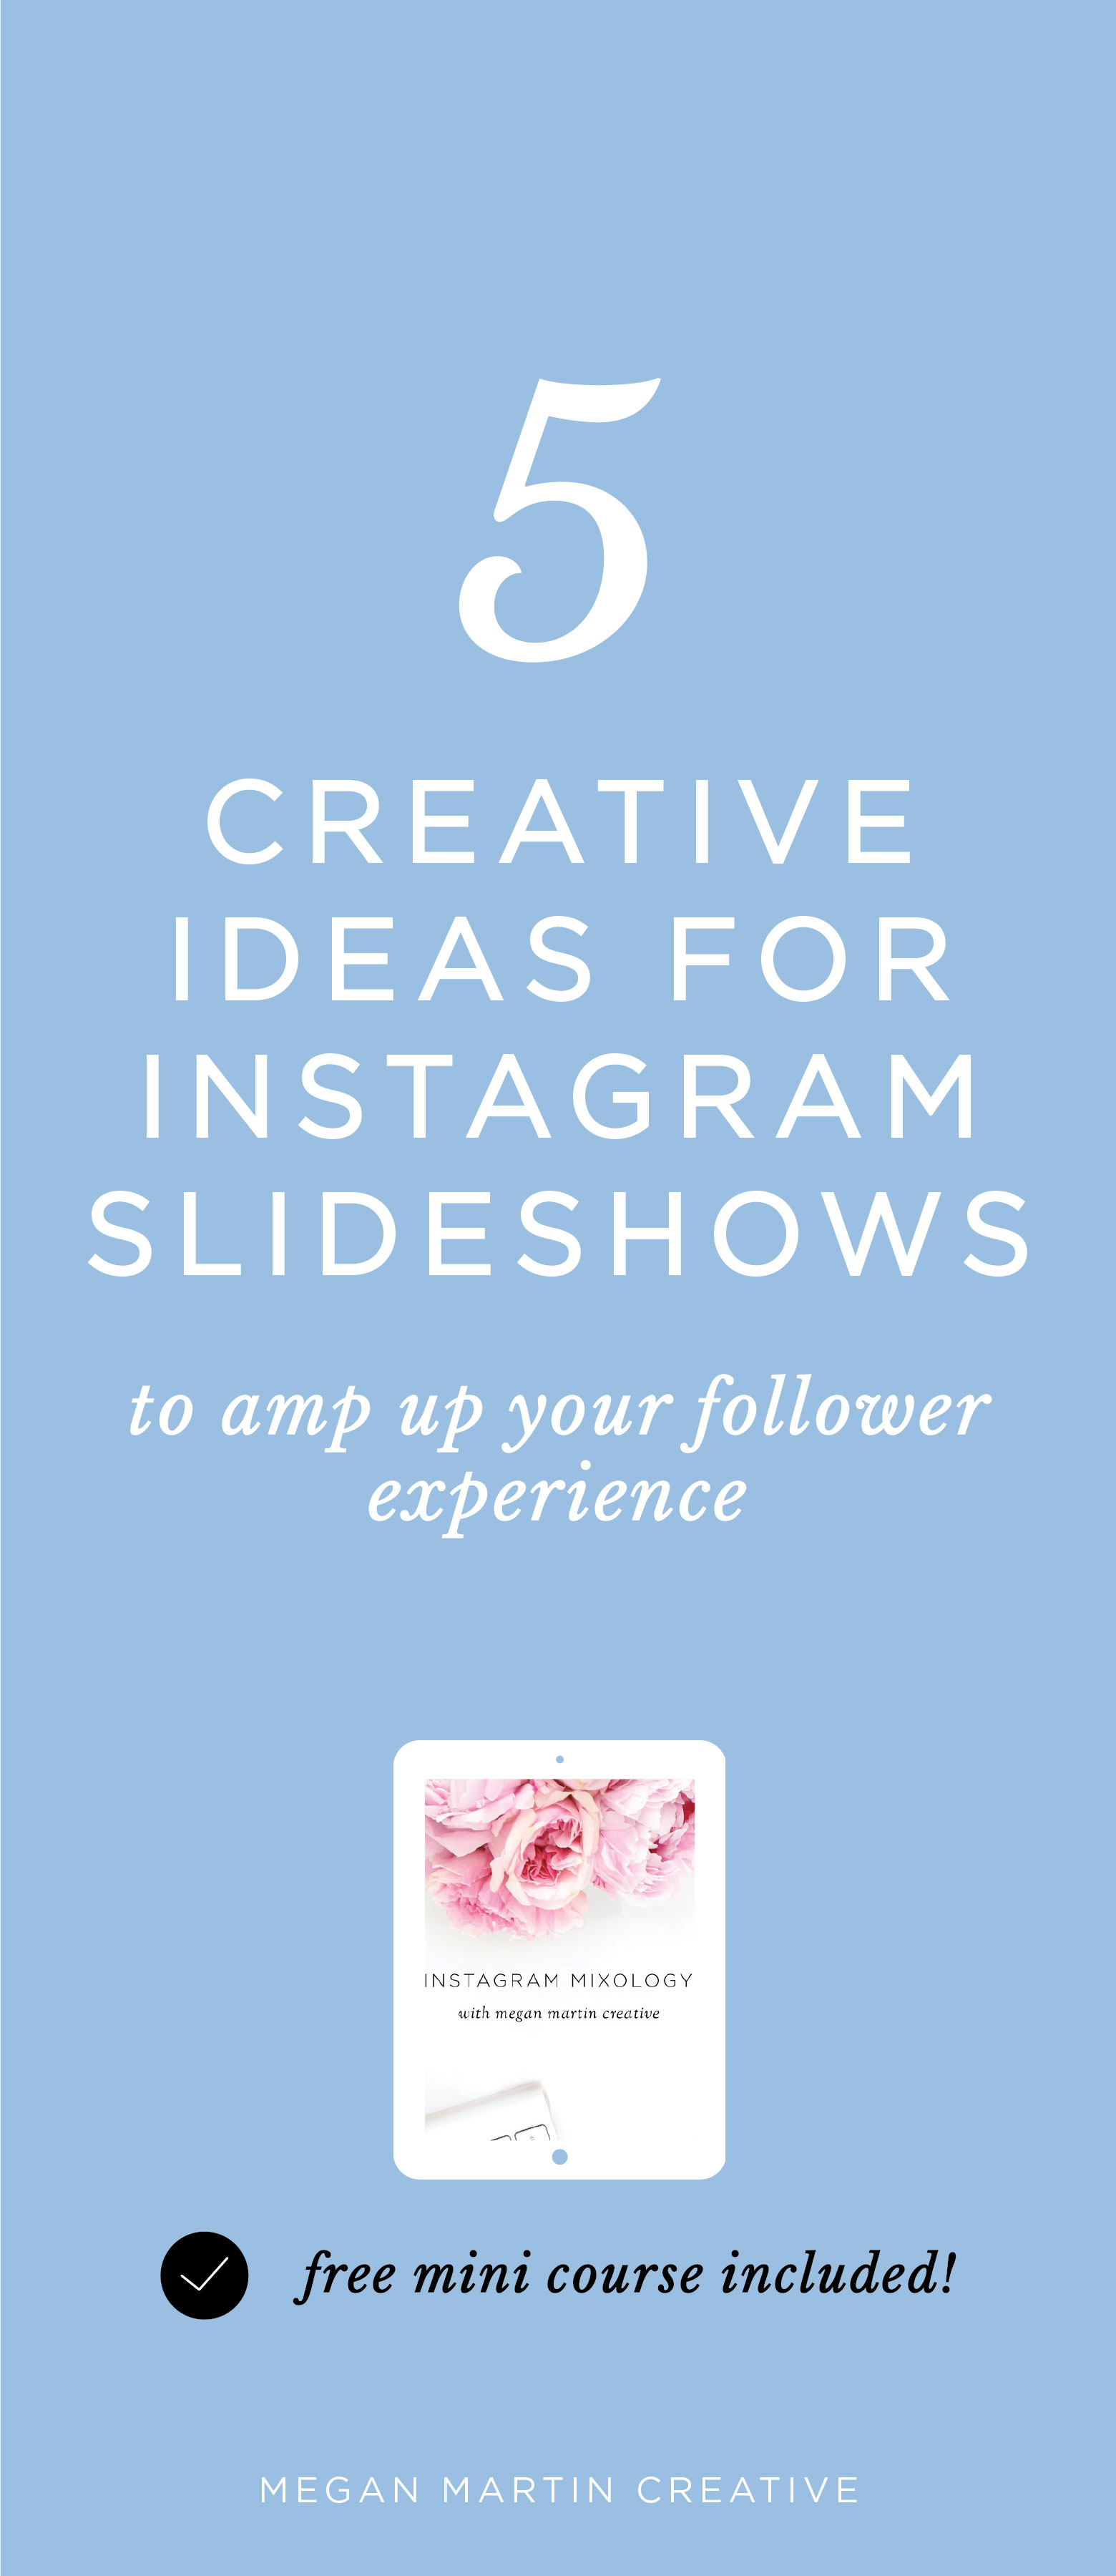 How to Get Creative with the New Instagram Slideshows Megan Martin